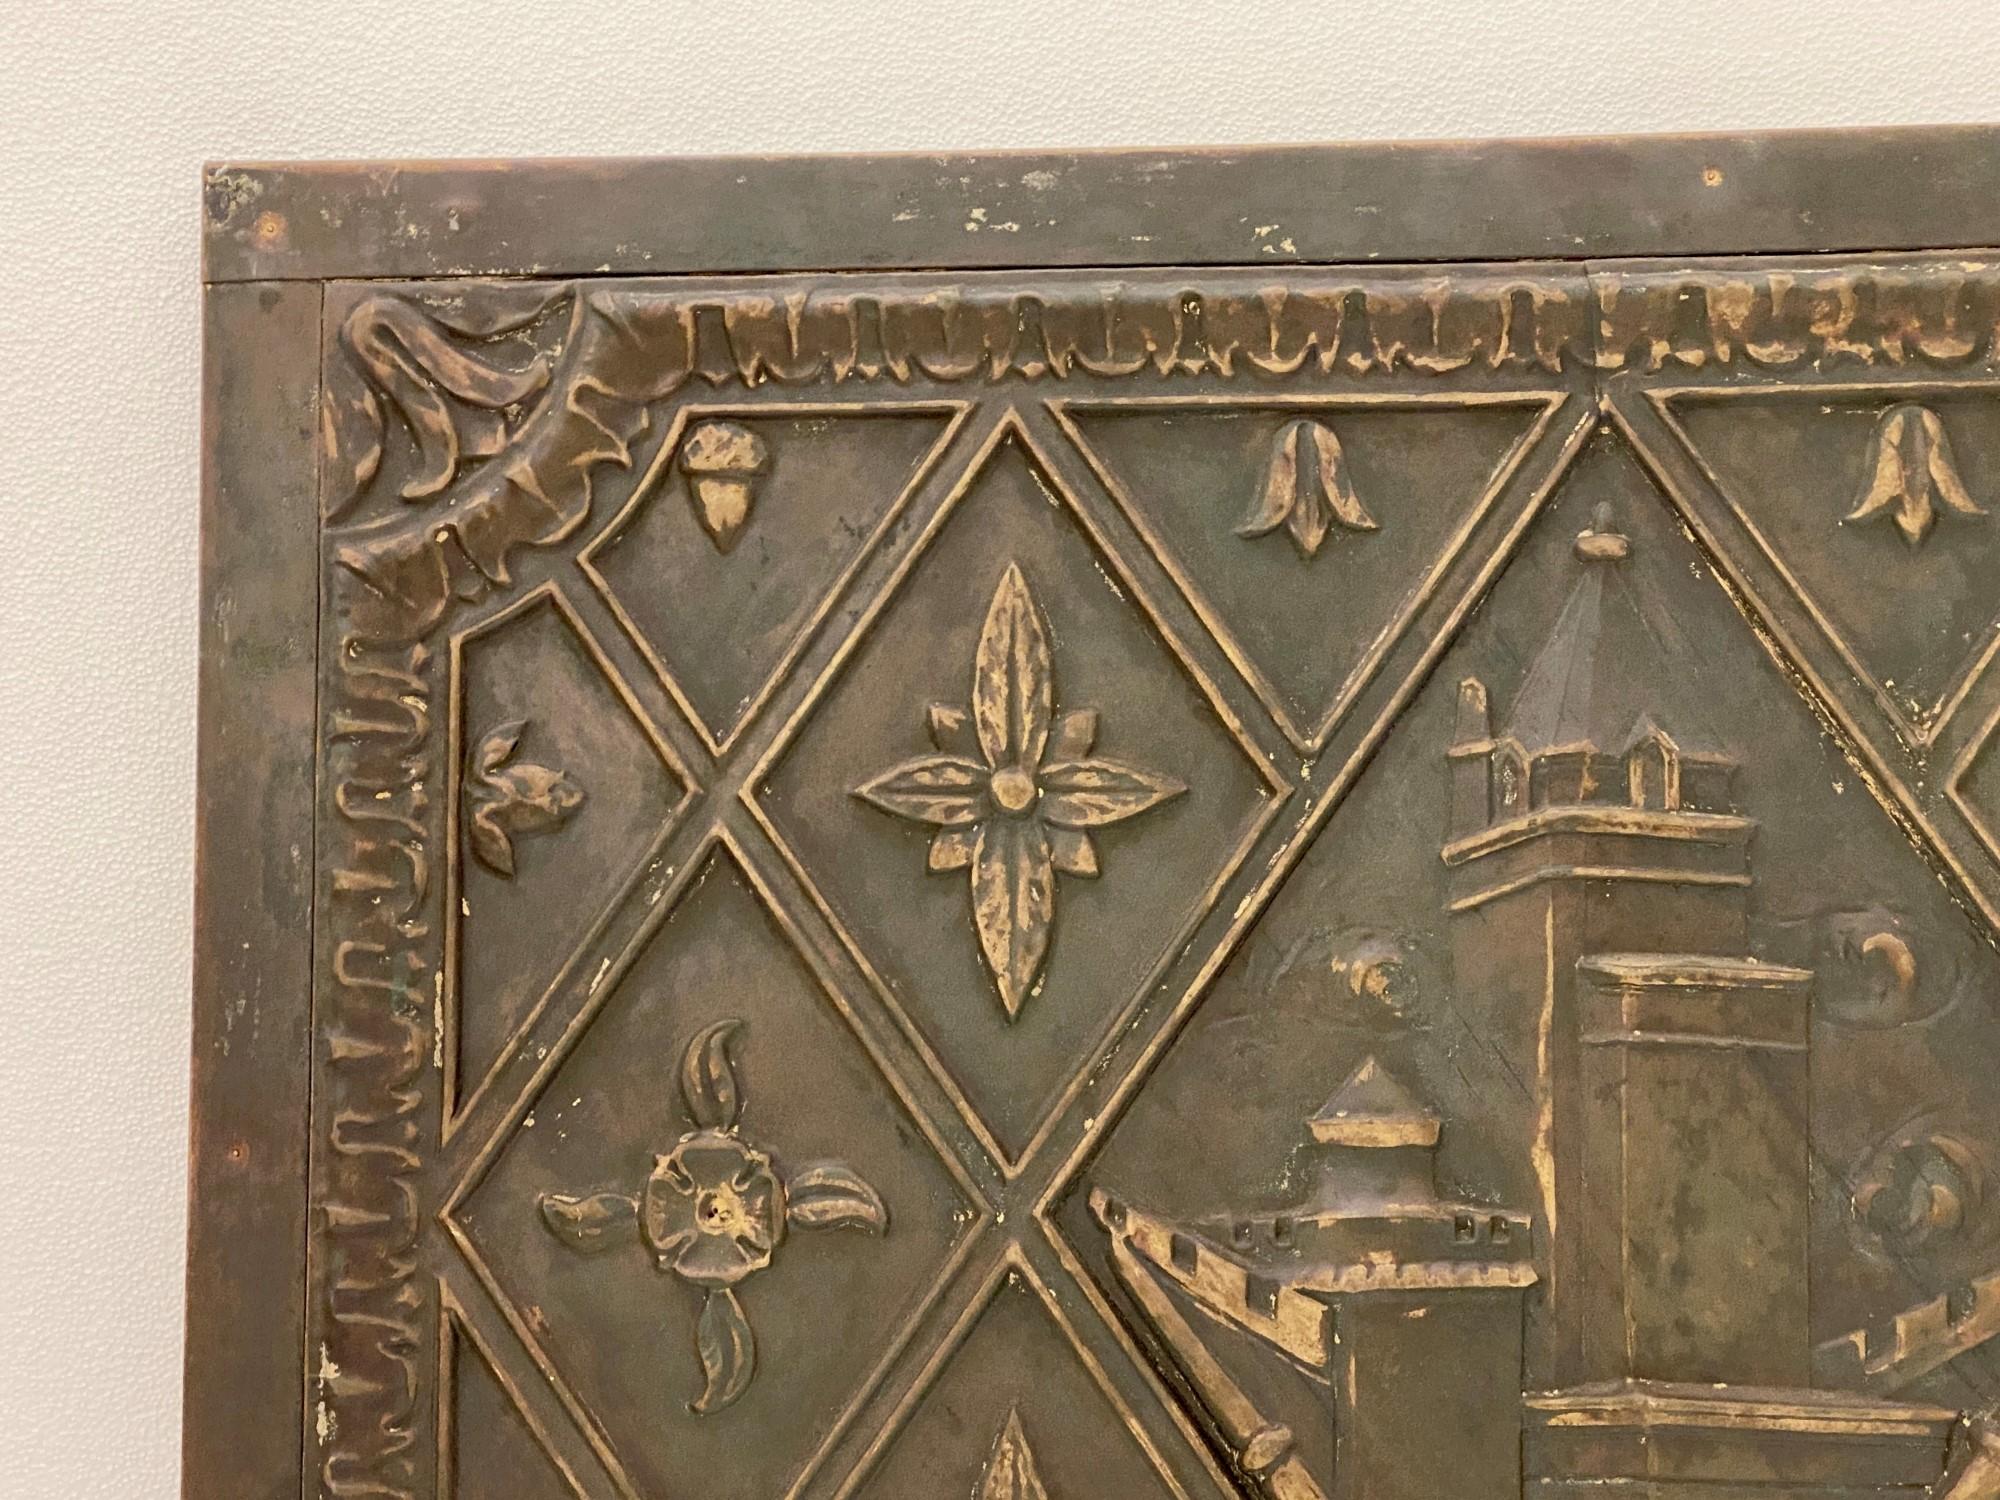 This unique copper panel was part of the facade of the 1921 landmark Crown Building at 57th St and 5th Avenue, New York City across from the Trump Building. The Crown Building was designed by Warren and Wetmore, the architects of the Helmsley